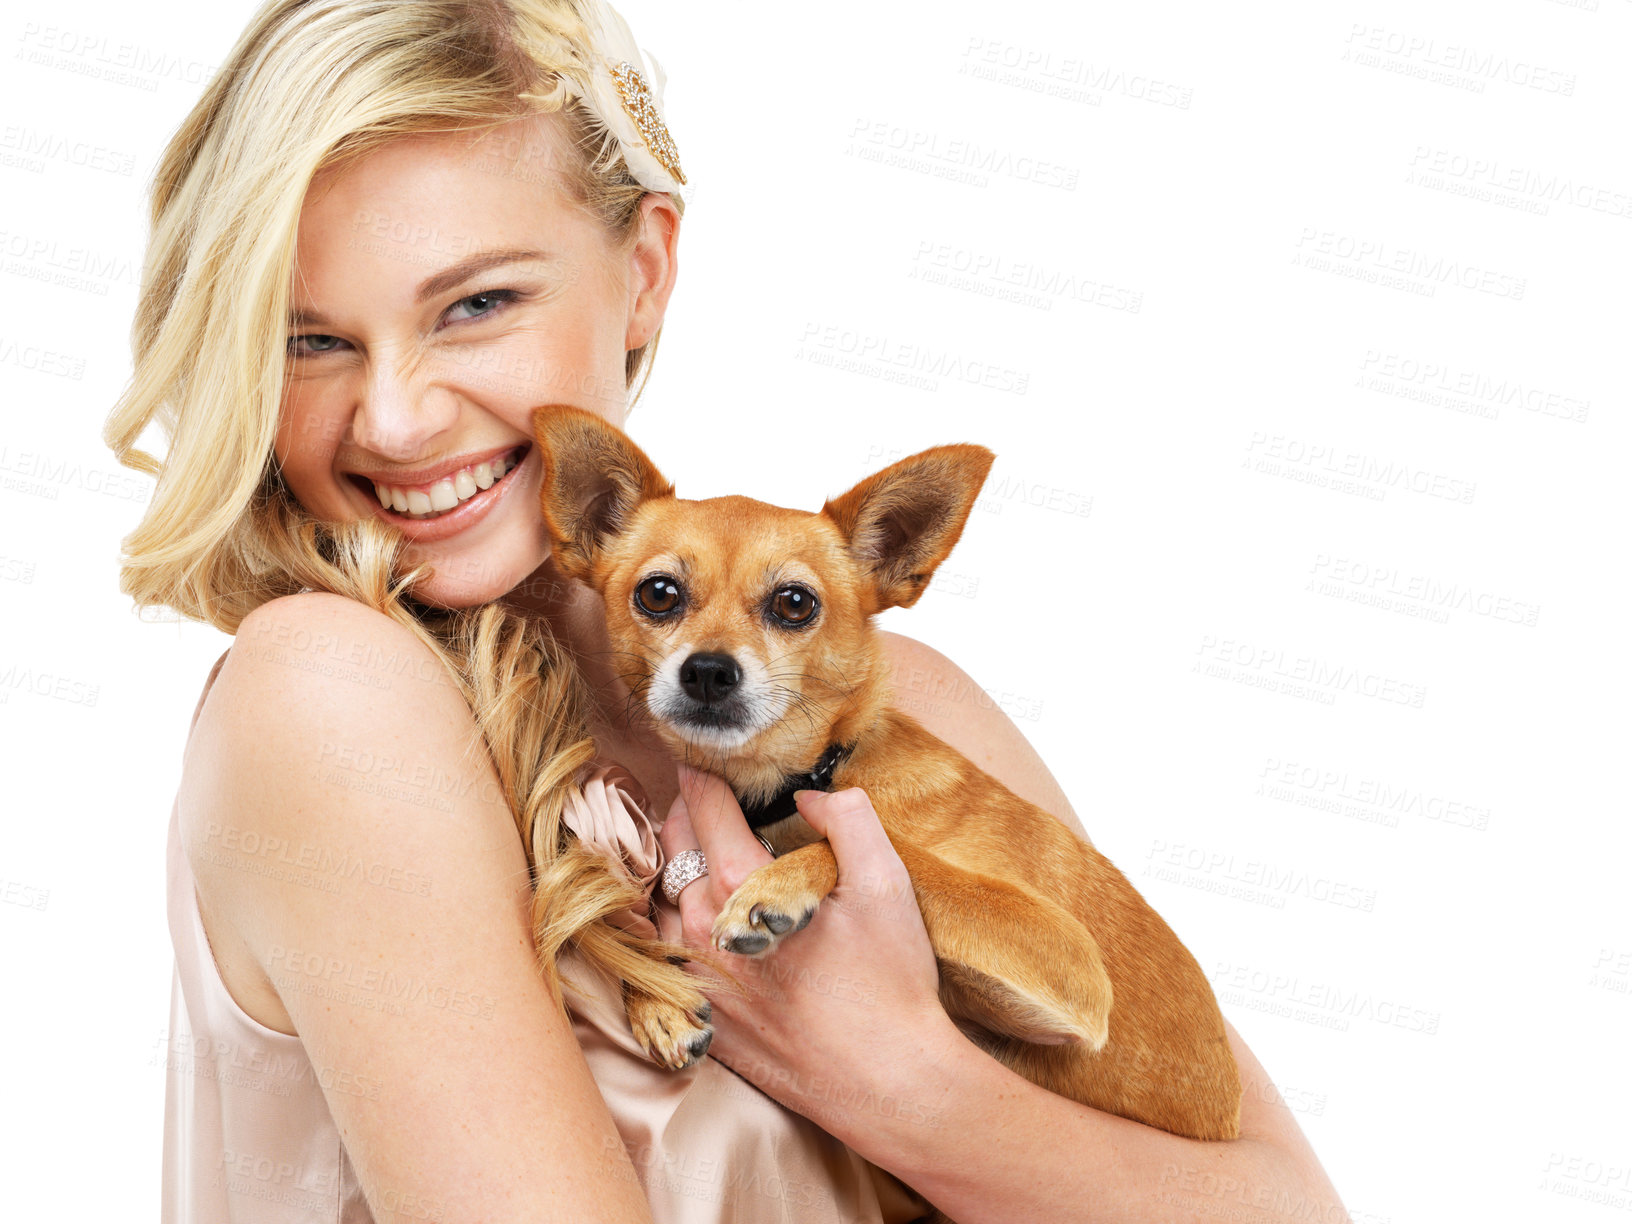 Buy stock photo Portrait, elegant and a woman with her dog in studio isolated on white background for love or friendship. Smile, fashion and classy with a happy young model holding her pet puppy at a party or event